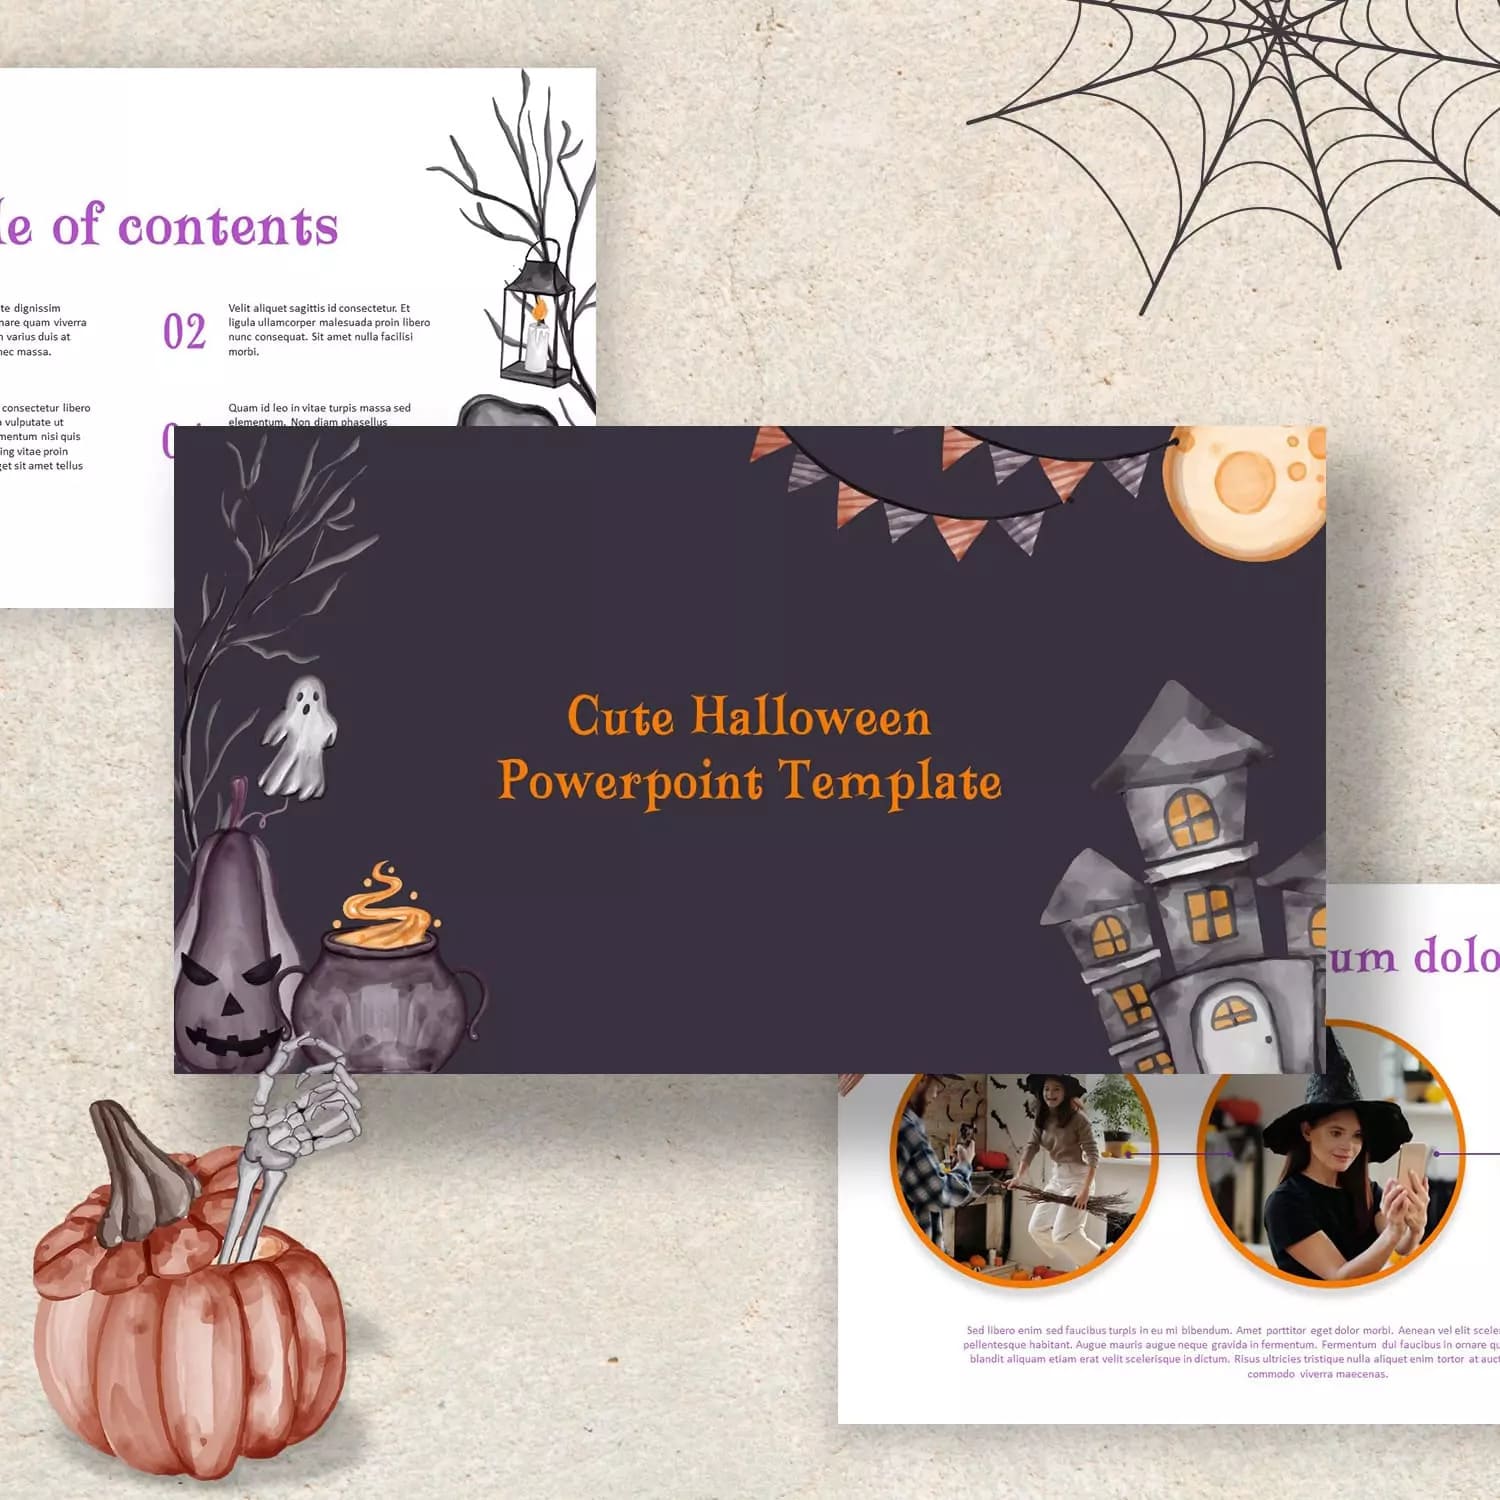 Cute Halloween Powerpoint Template preview image.